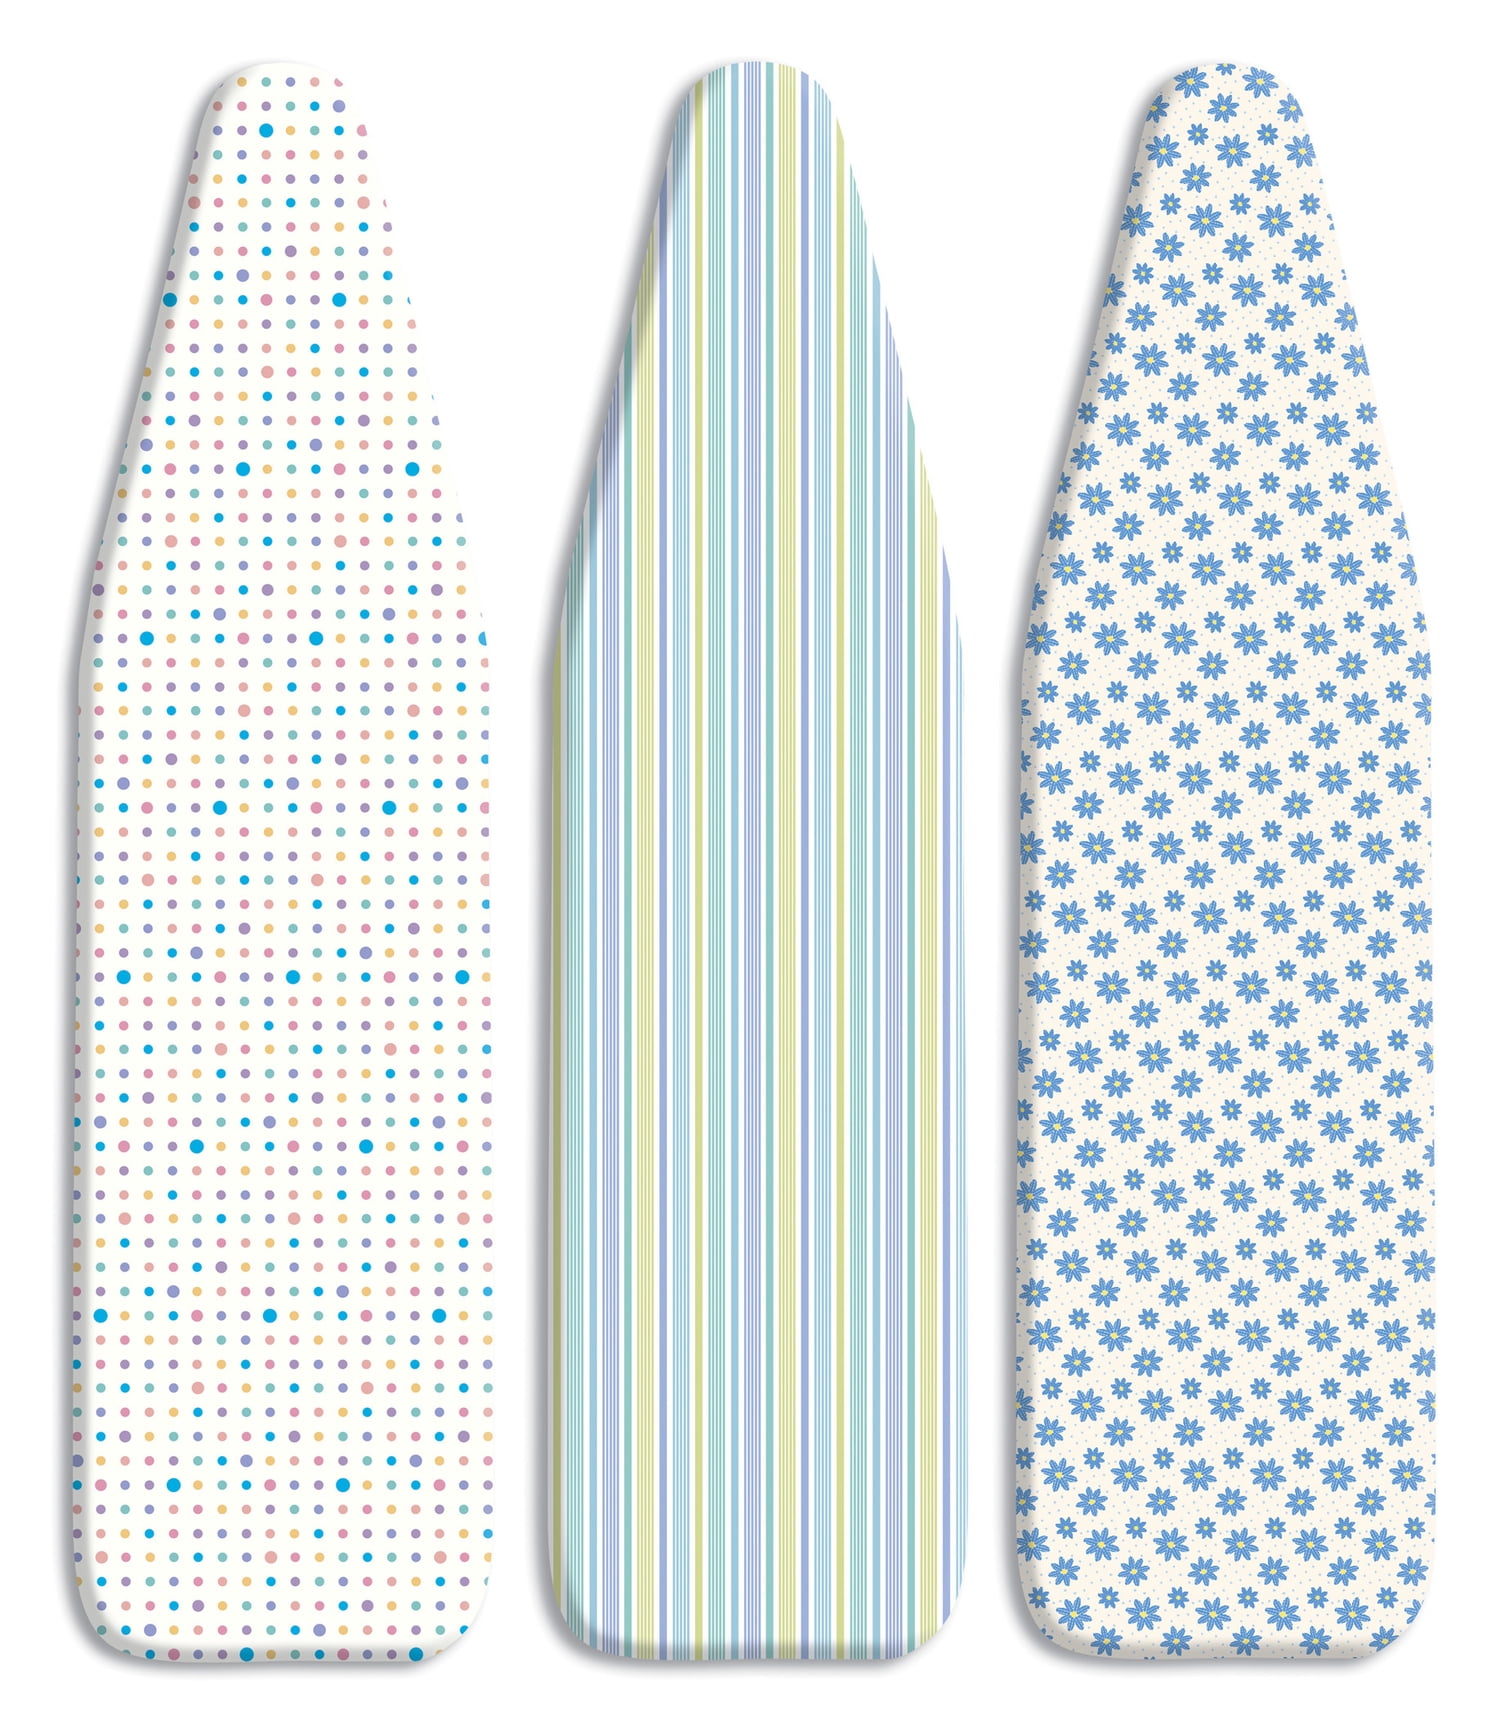 Concord Turquoise Ironing Board Cover & Pad Whitmor 6880-833-CONTOR 54 x 15 in 